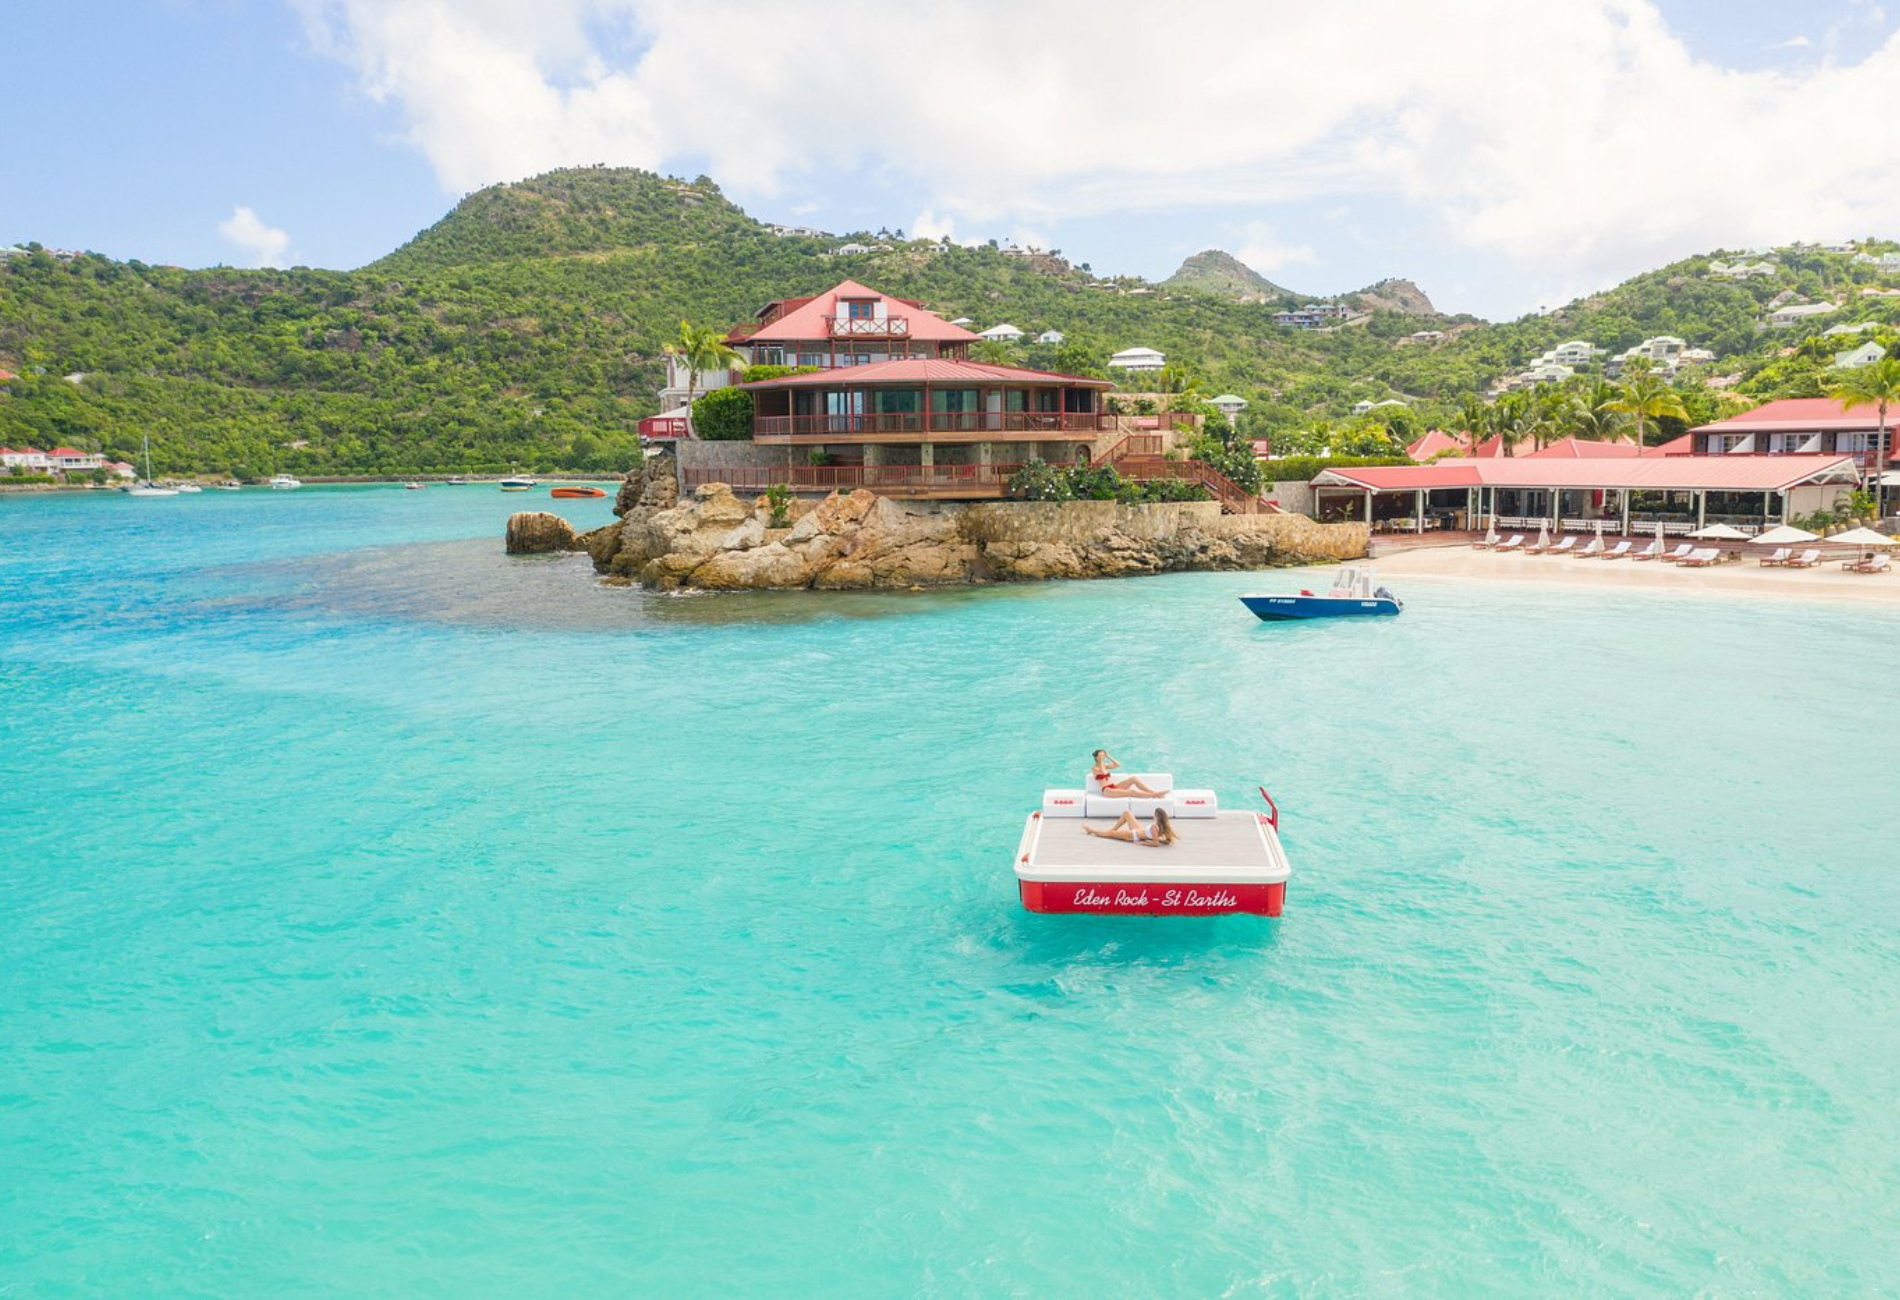 Bird's eye view of Eden Rock, where the Sand Bar is one of the best restaurants in St. Barts